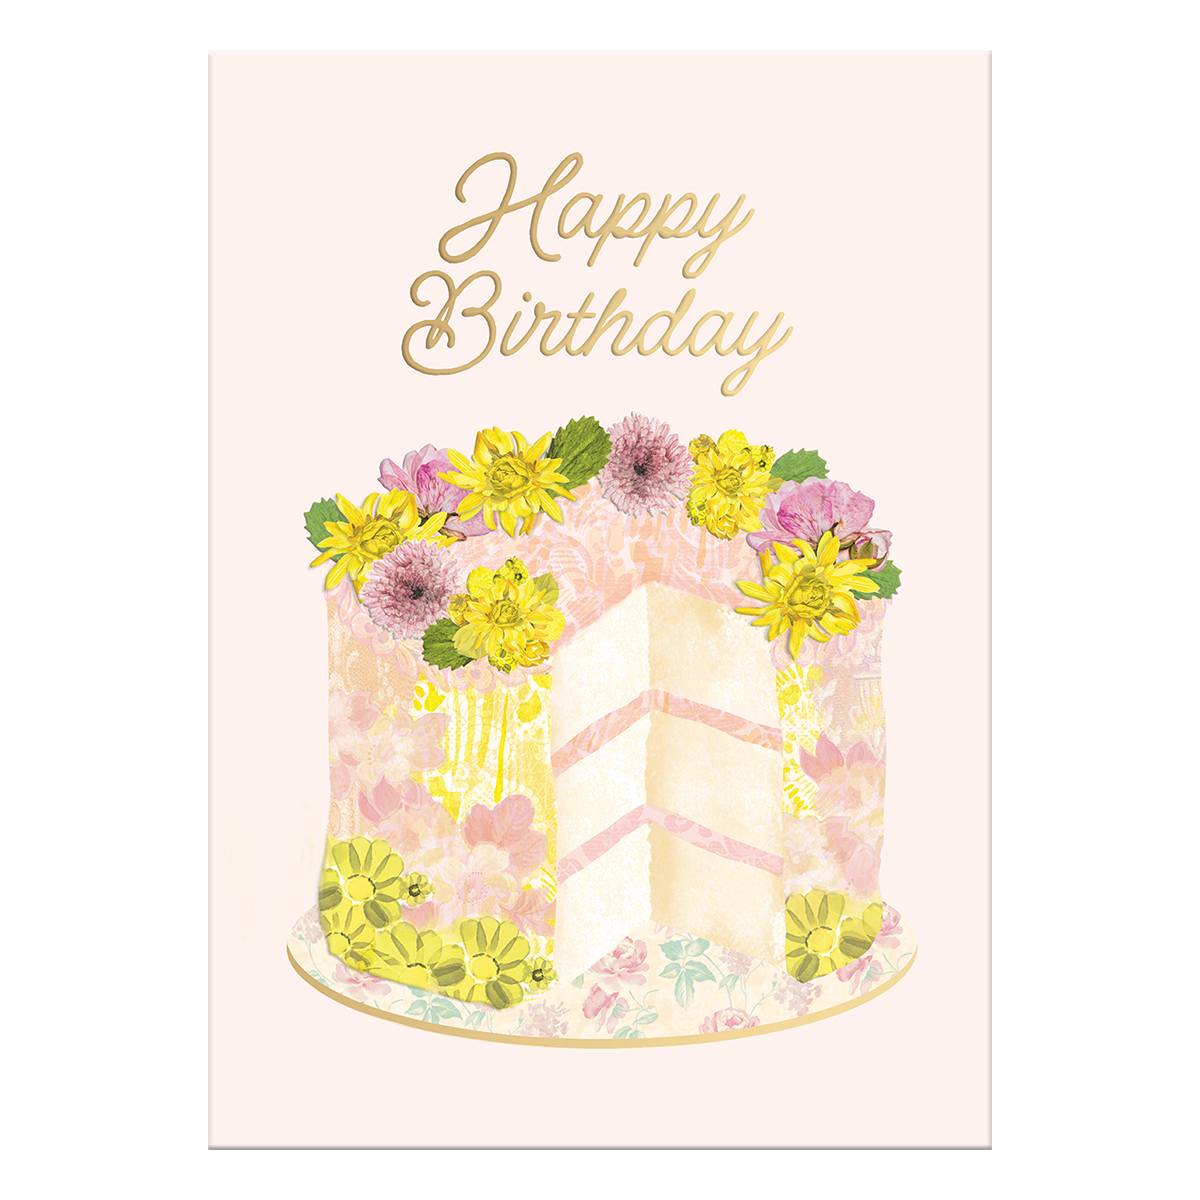 Collage Cake Greeting Card Product